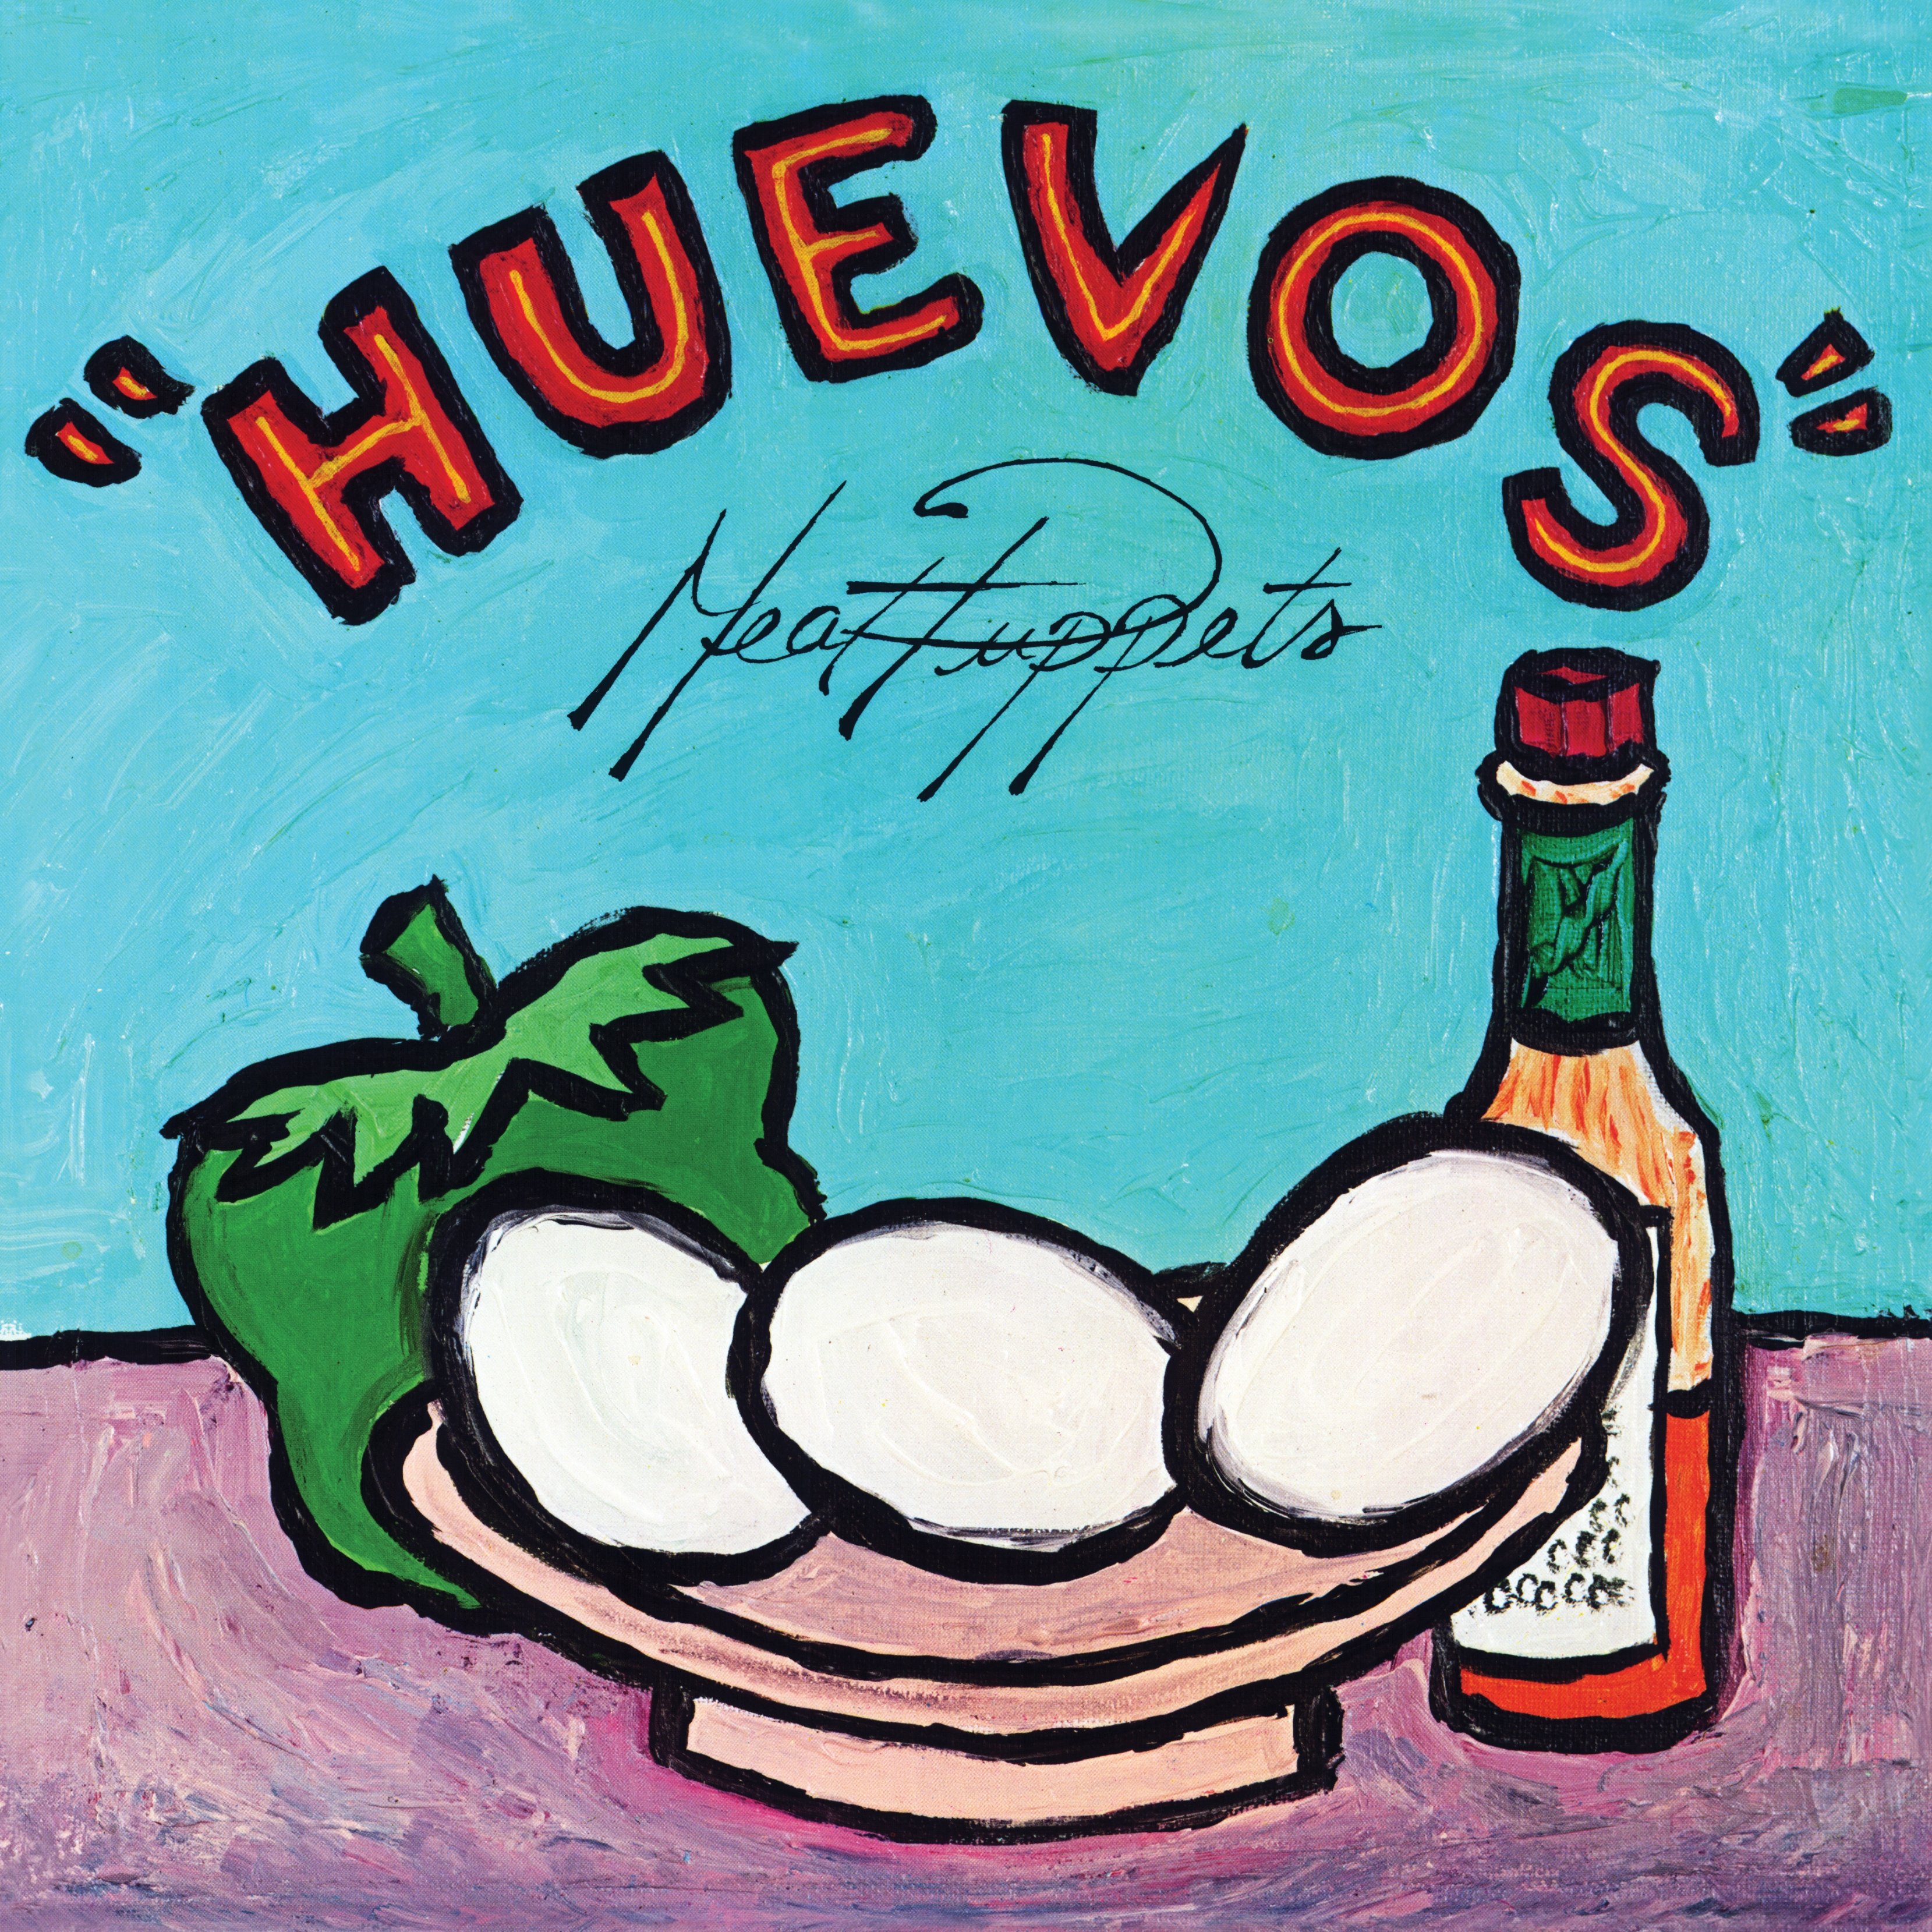 Meat Puppets - Huevos (2011) FLAC Download